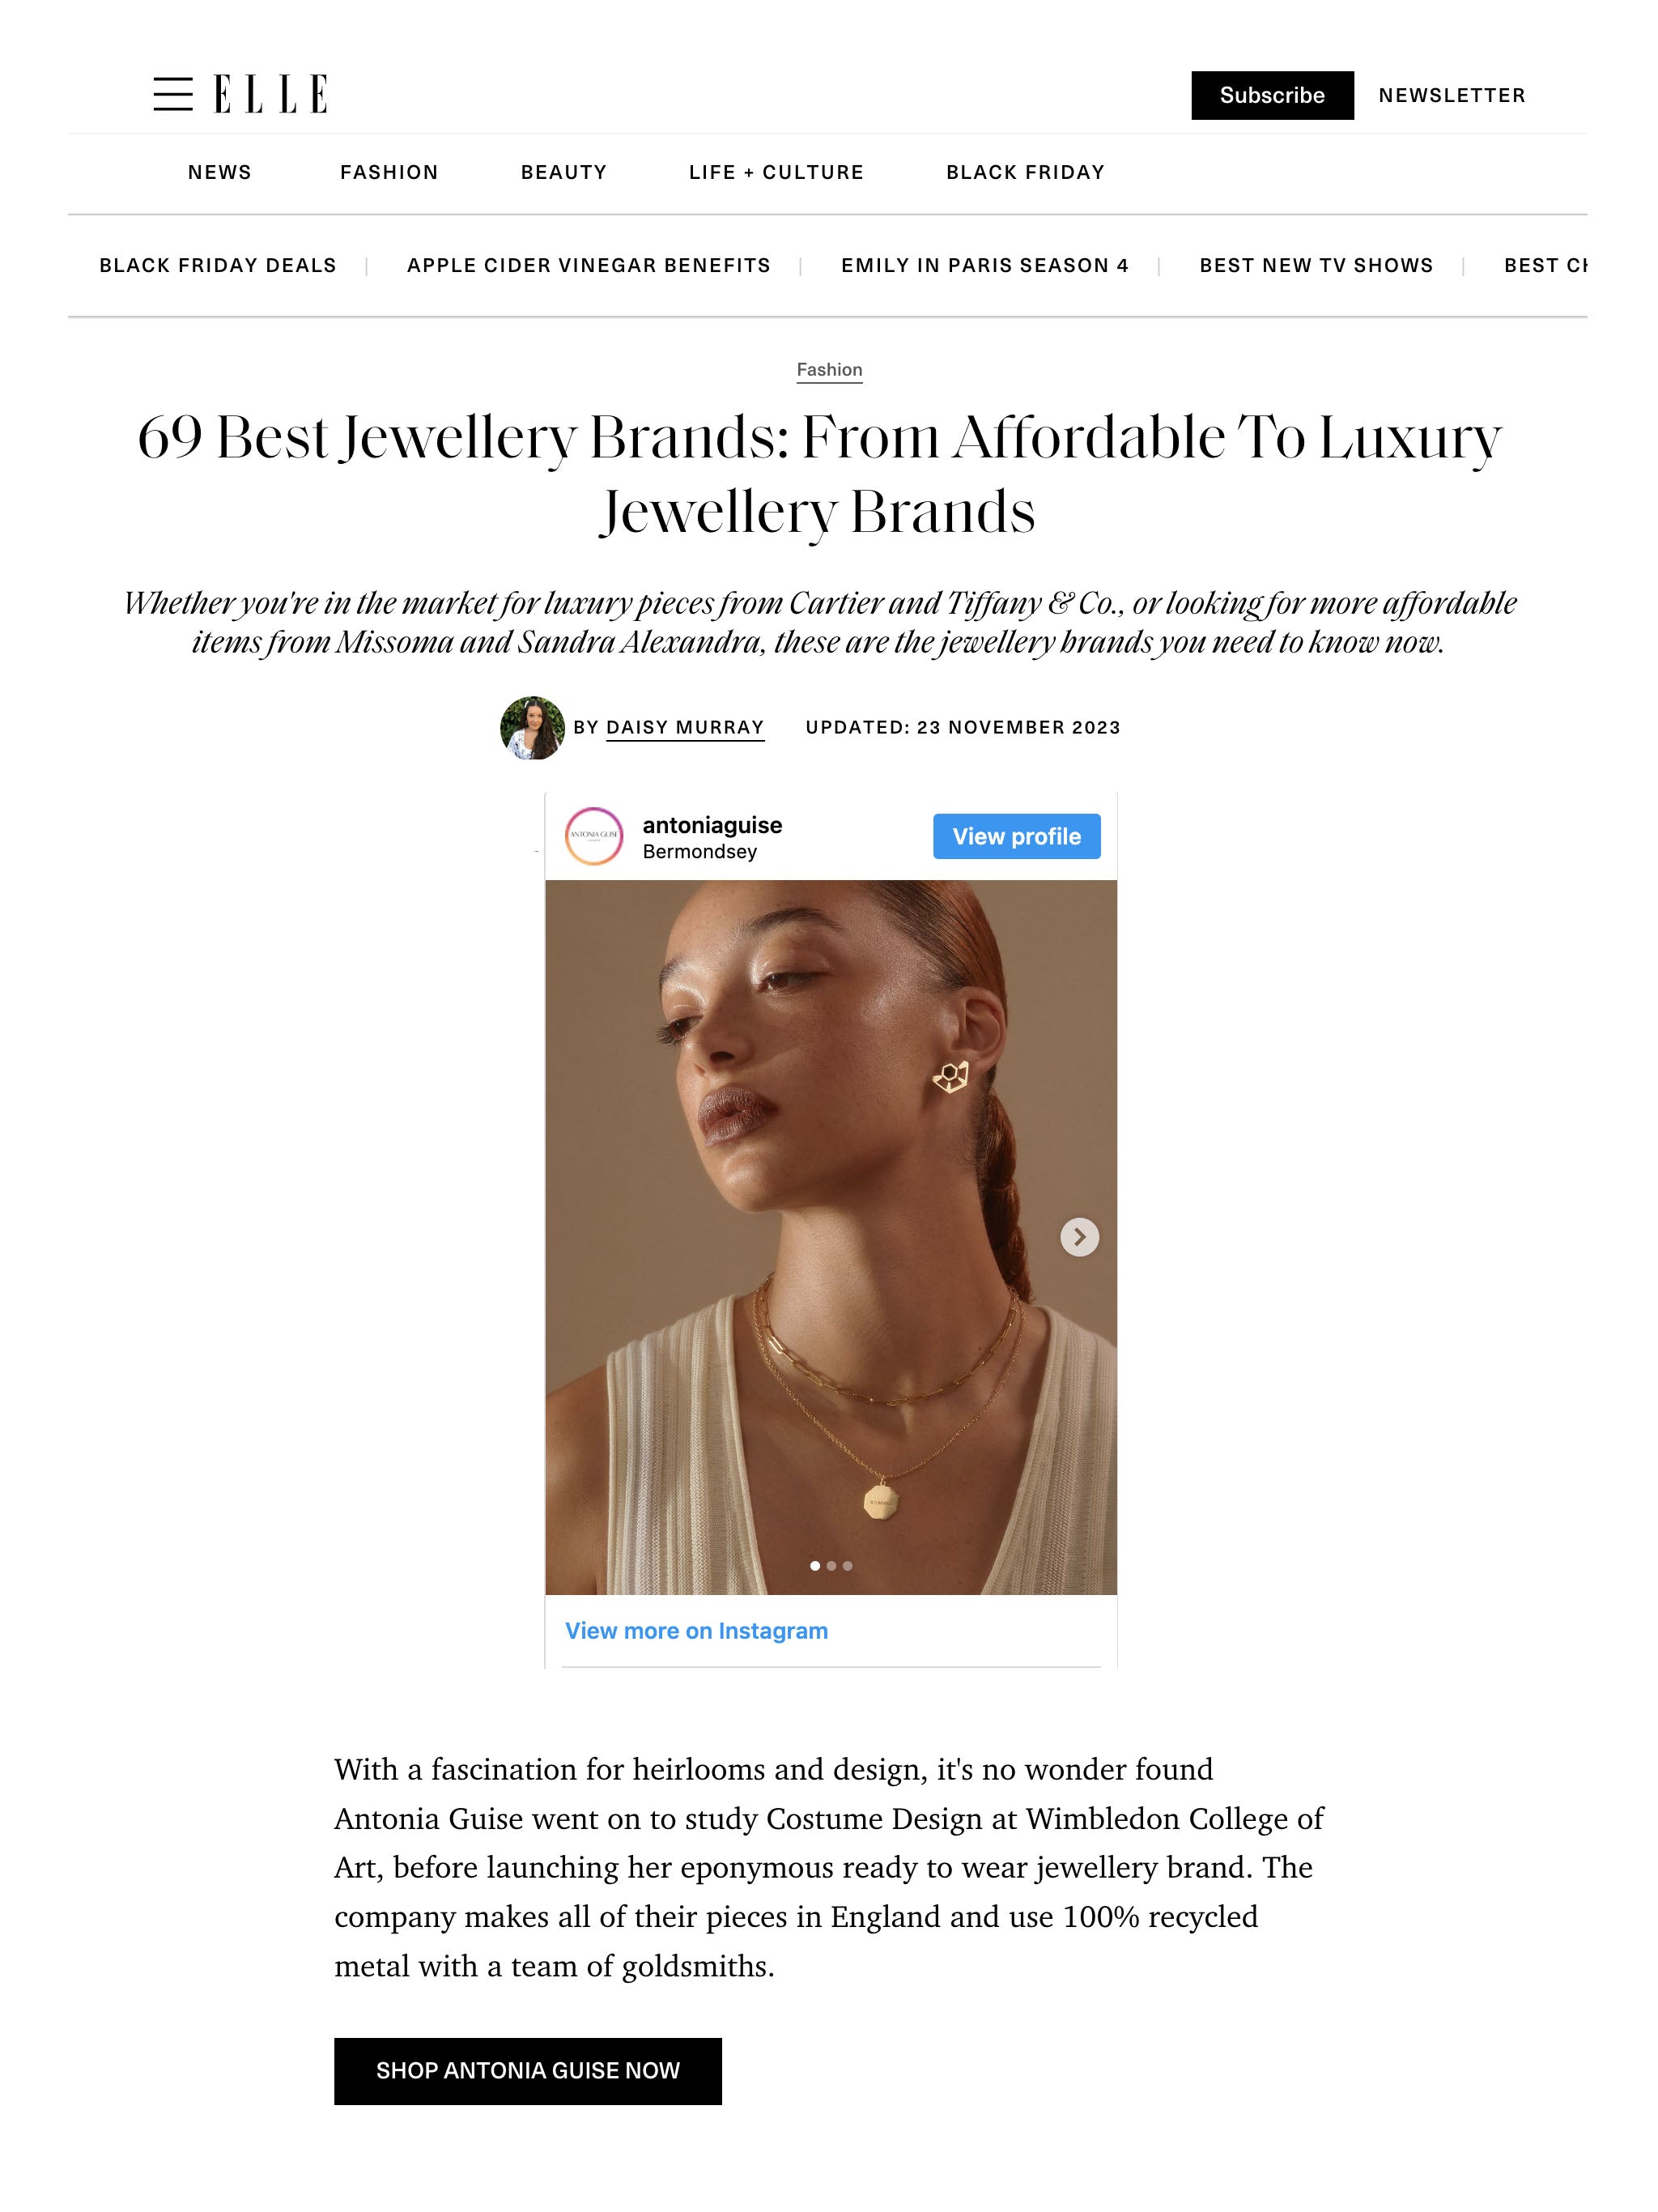 Screenshot of ELLE's 69 best jewellery brand article featuring Antonia Guise